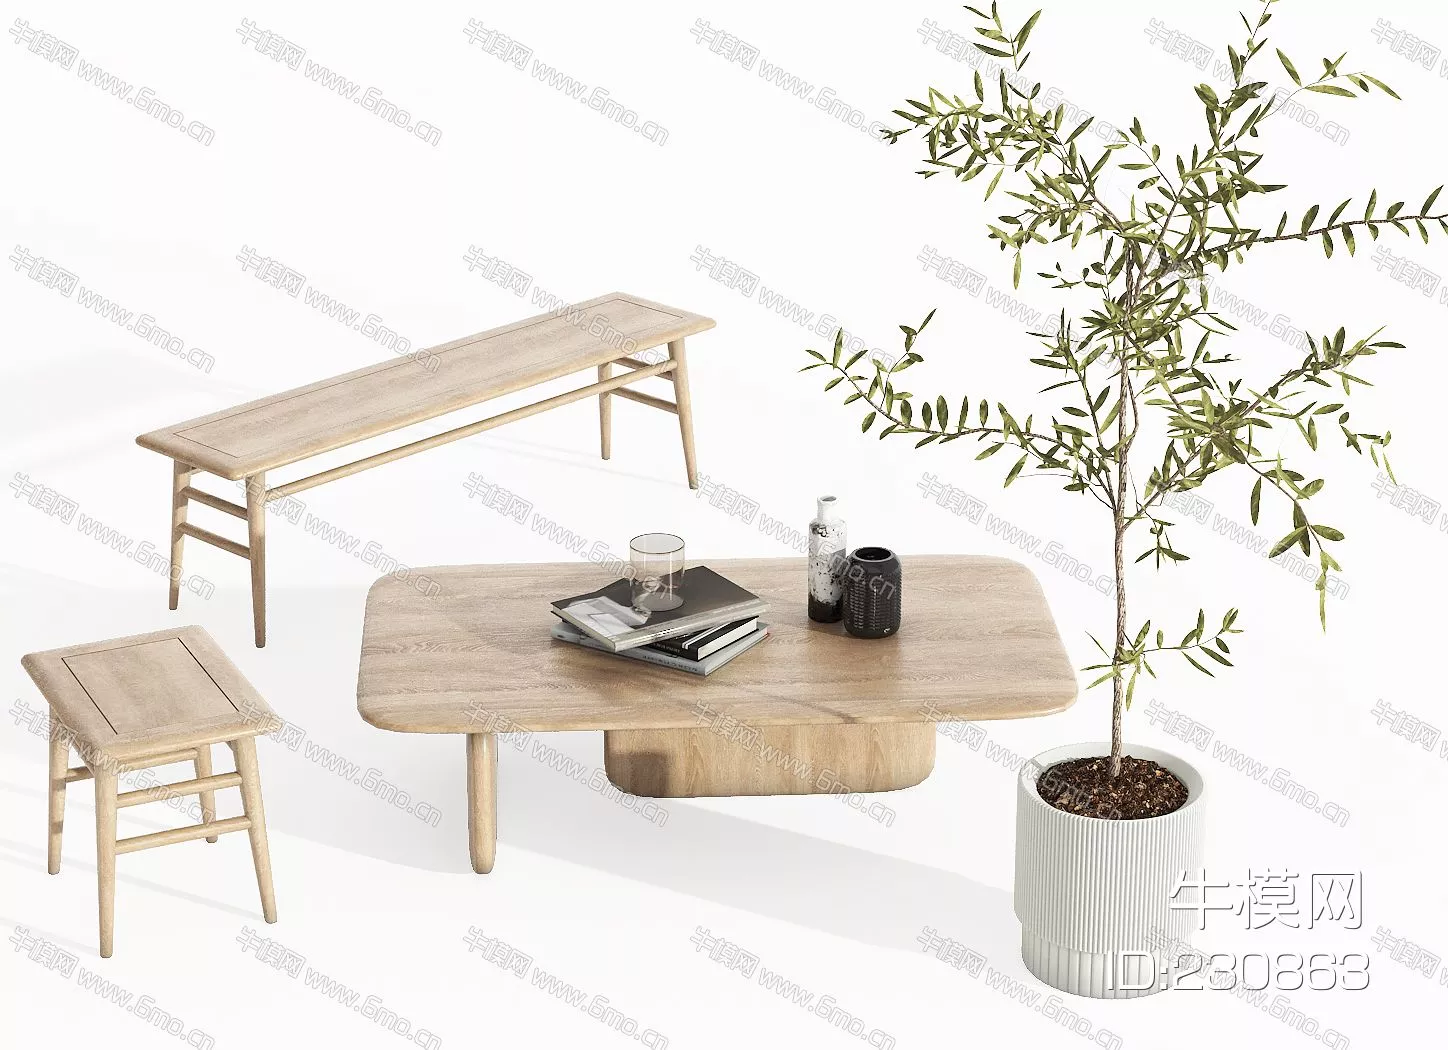 MODERN COFFEE TABLE - SKETCHUP 3D MODEL - VRAY - 230863